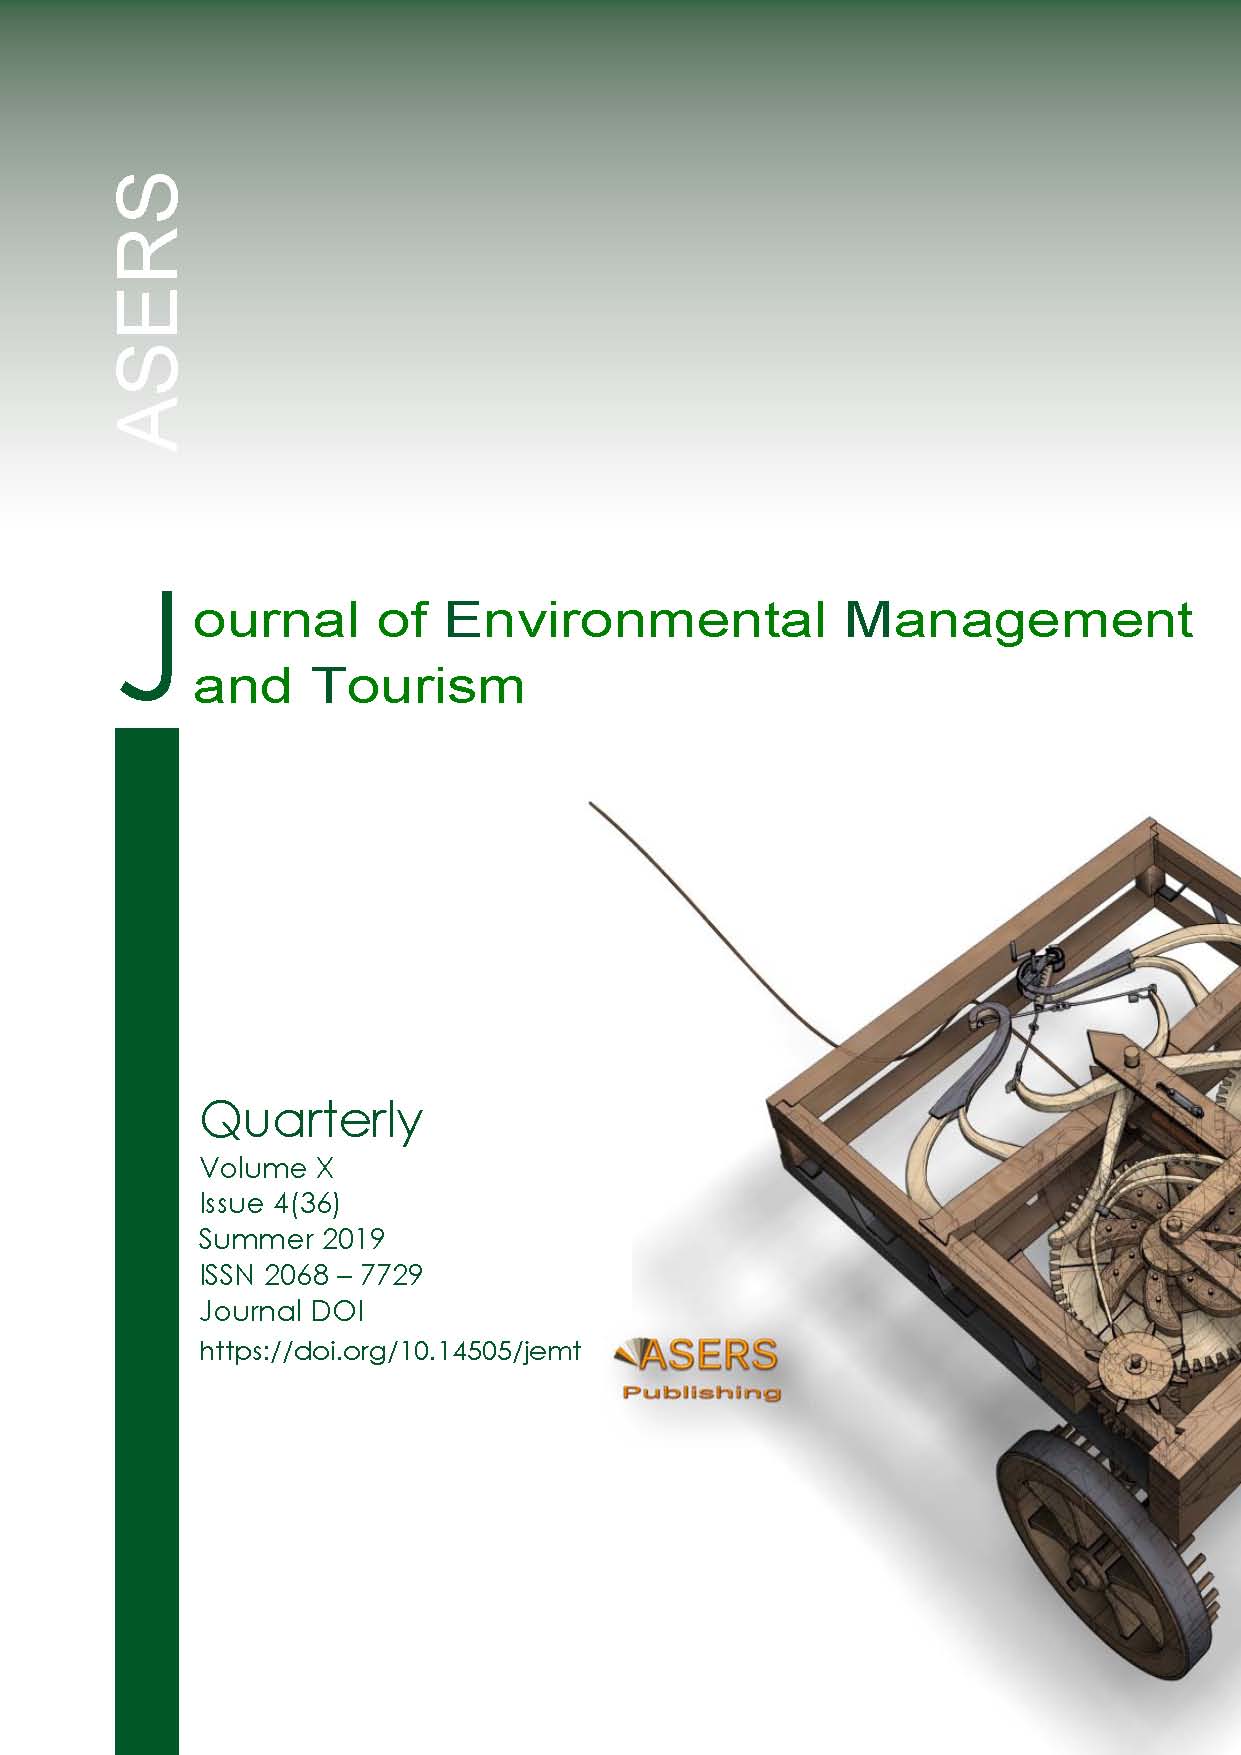 Impact of Tourism and Recreational Activities on the Biological Diversity in the Altai Republic